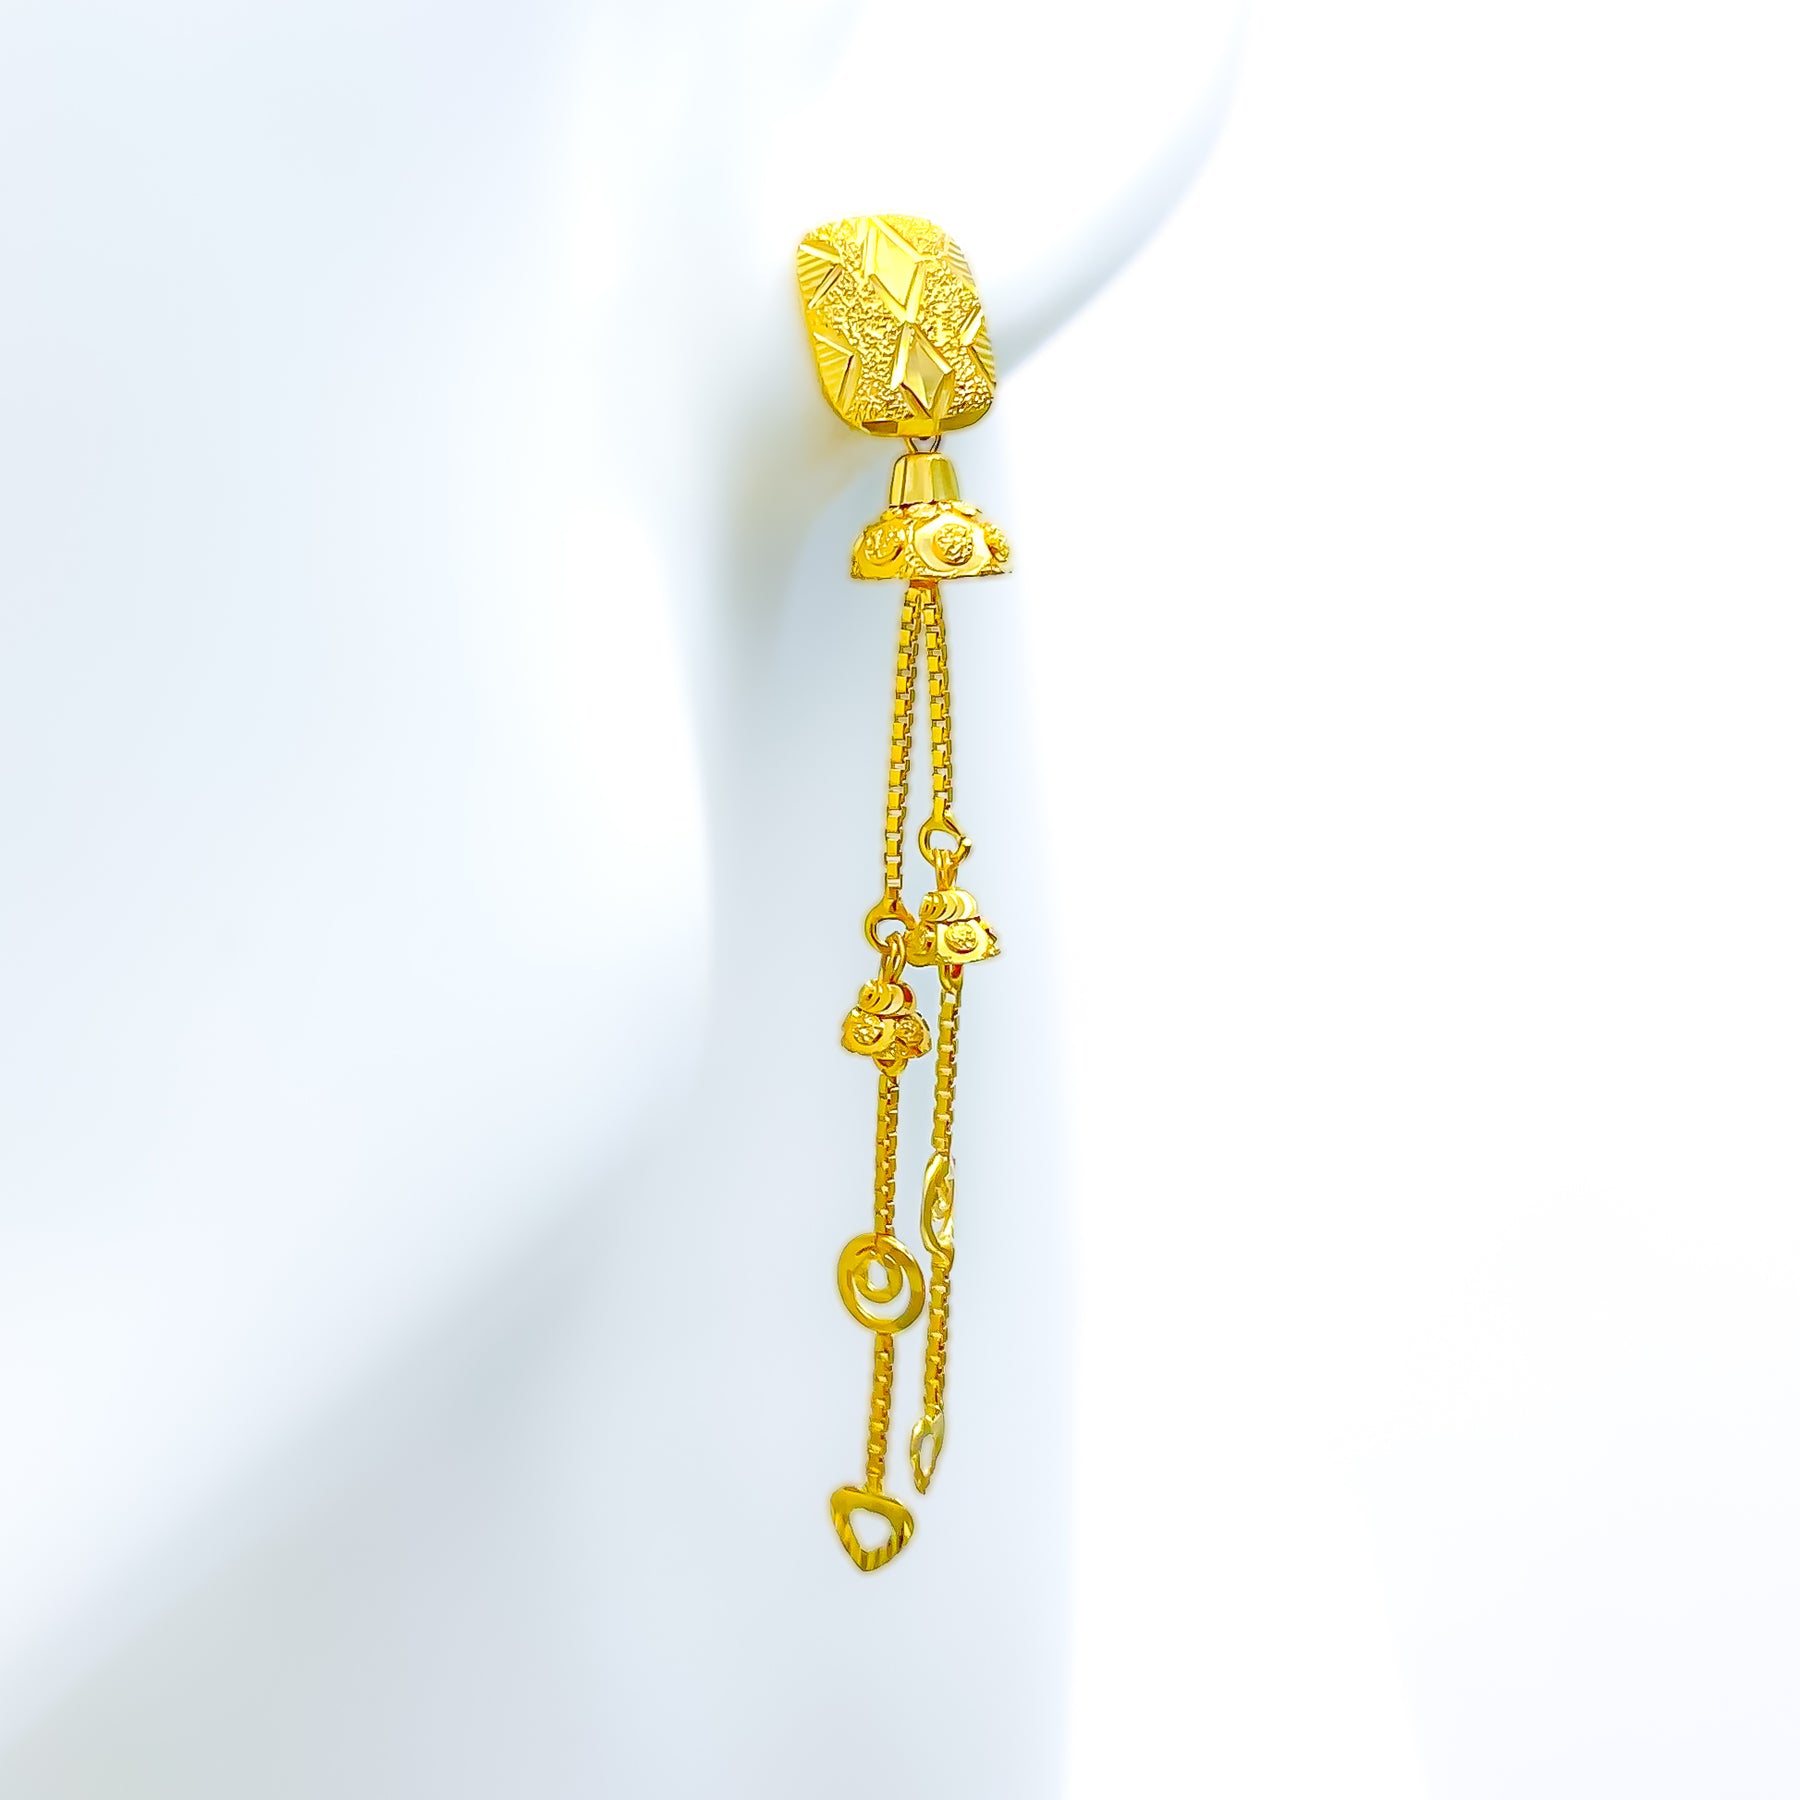 Buy Sree kumaran Thangamaligai Yellow Gold 22K Latest Traditional Trendy Gold  Jewellery Special Fancy Casting Stone Drops Hanging Stud Earrings For Women  And Girls at Amazon.in